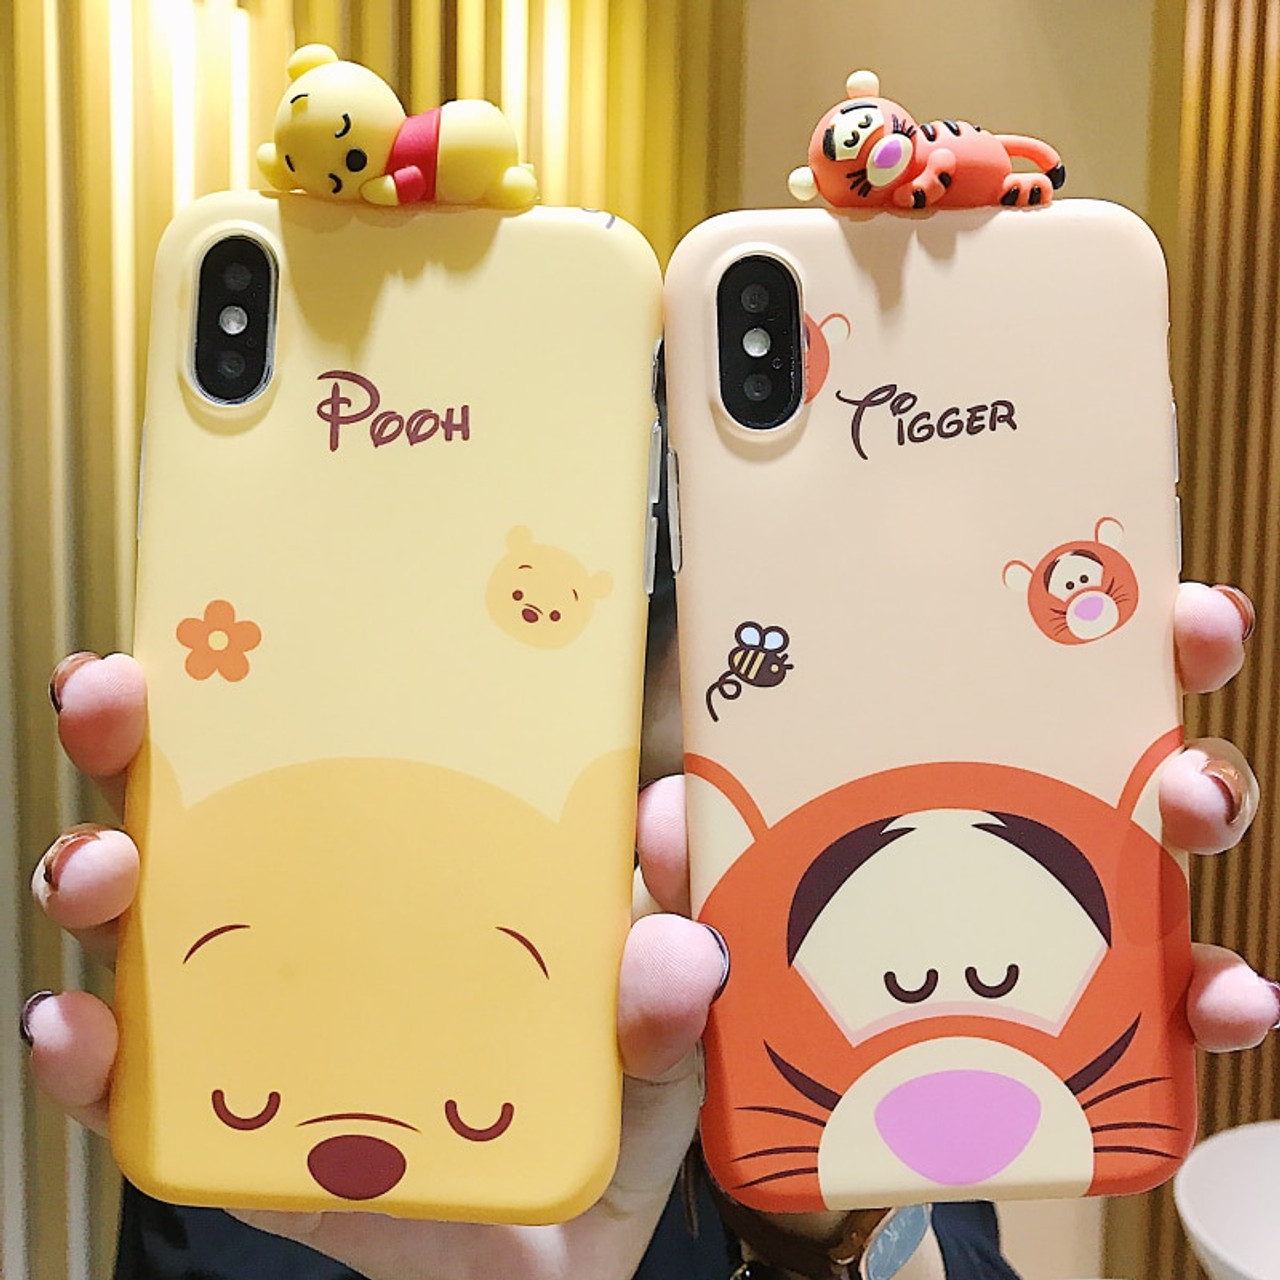 Cartoon Doll Winnie Pooh Tigger Phone Case For Iphone X Xs Max Xr All Inclusive Anti Fall Soft Cover For Iphone 7 8 6s Plus Case